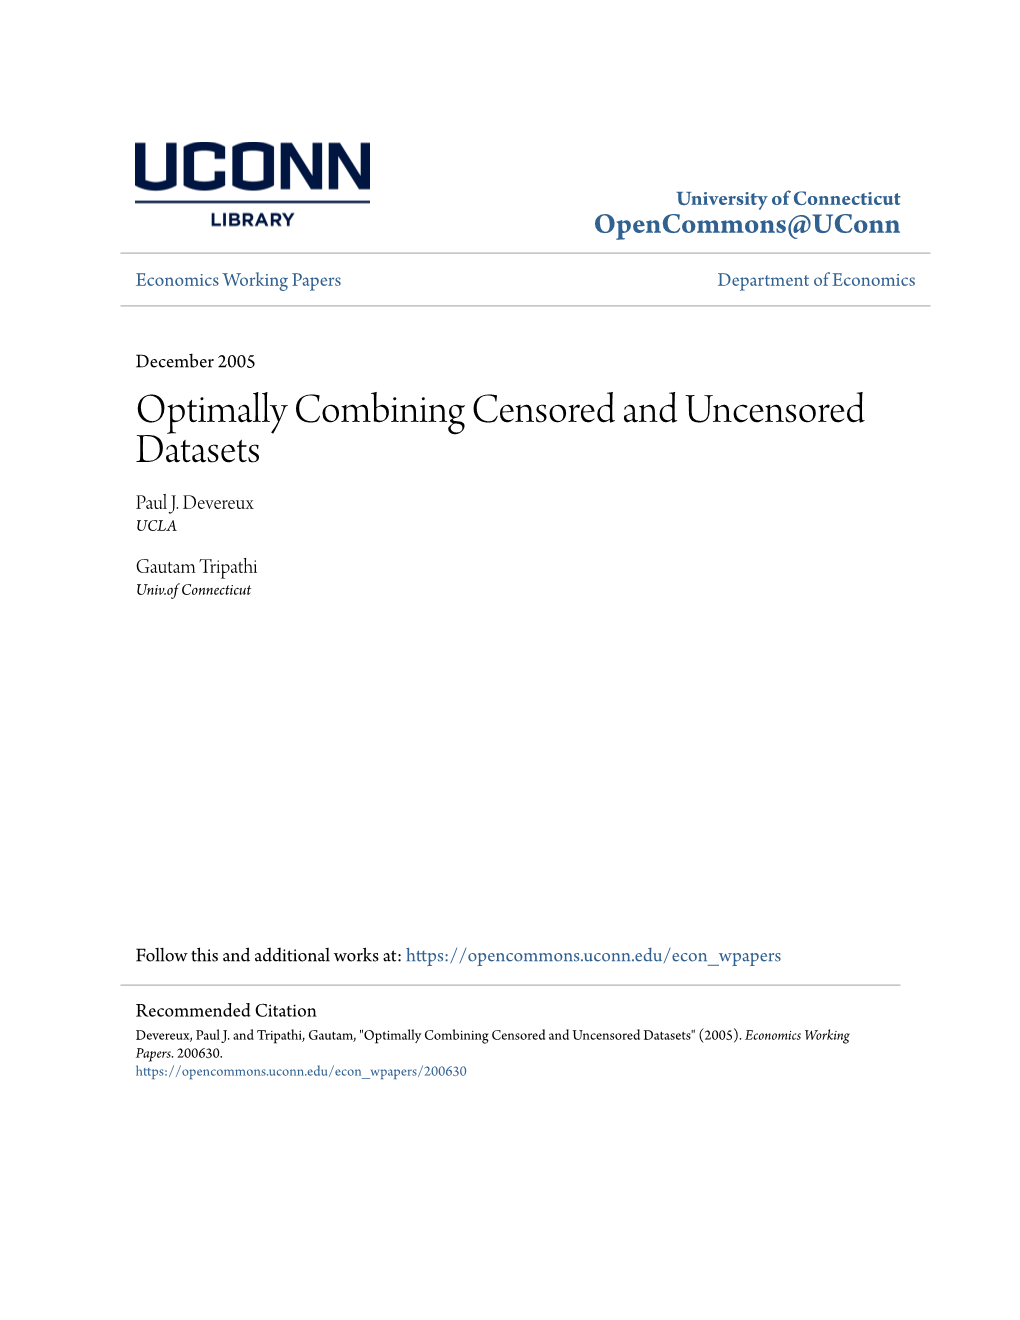 Optimally Combining Censored and Uncensored Datasets Paul J